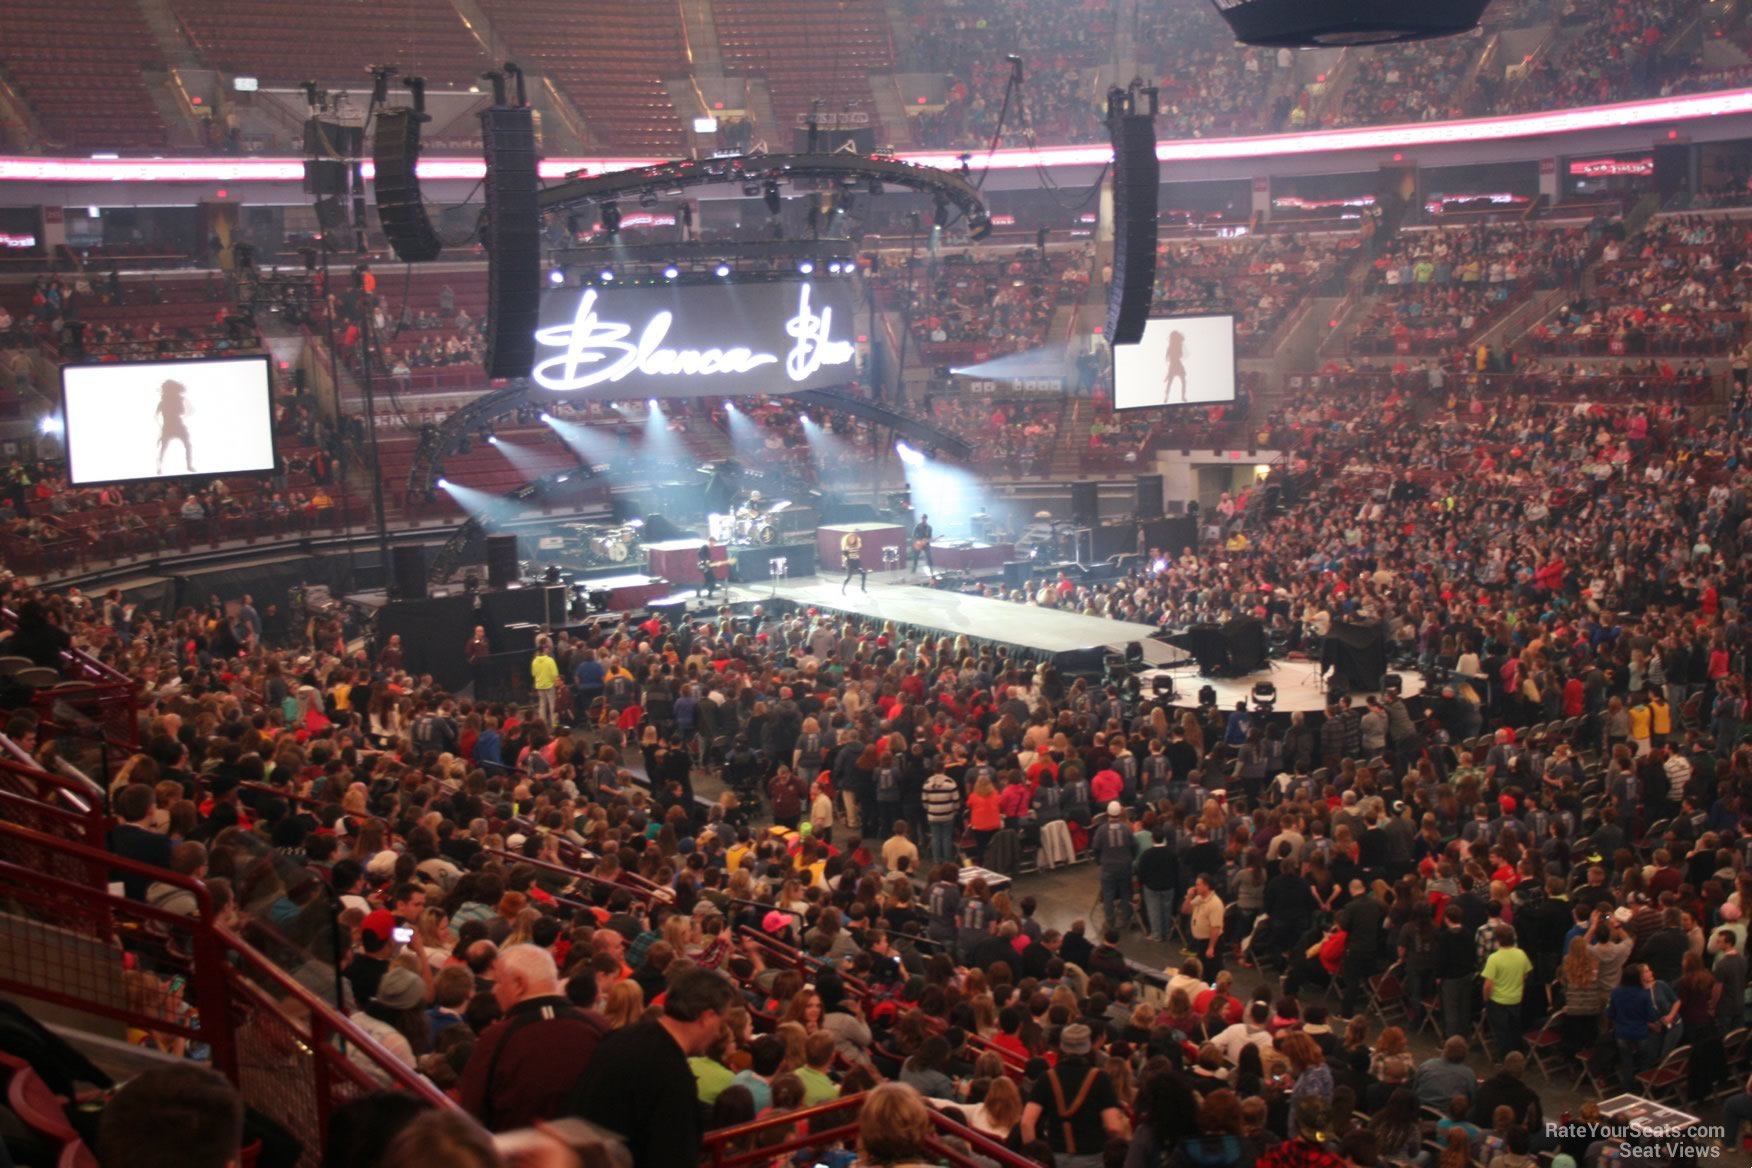 section 203, row d seat view  for concert - schottenstein center